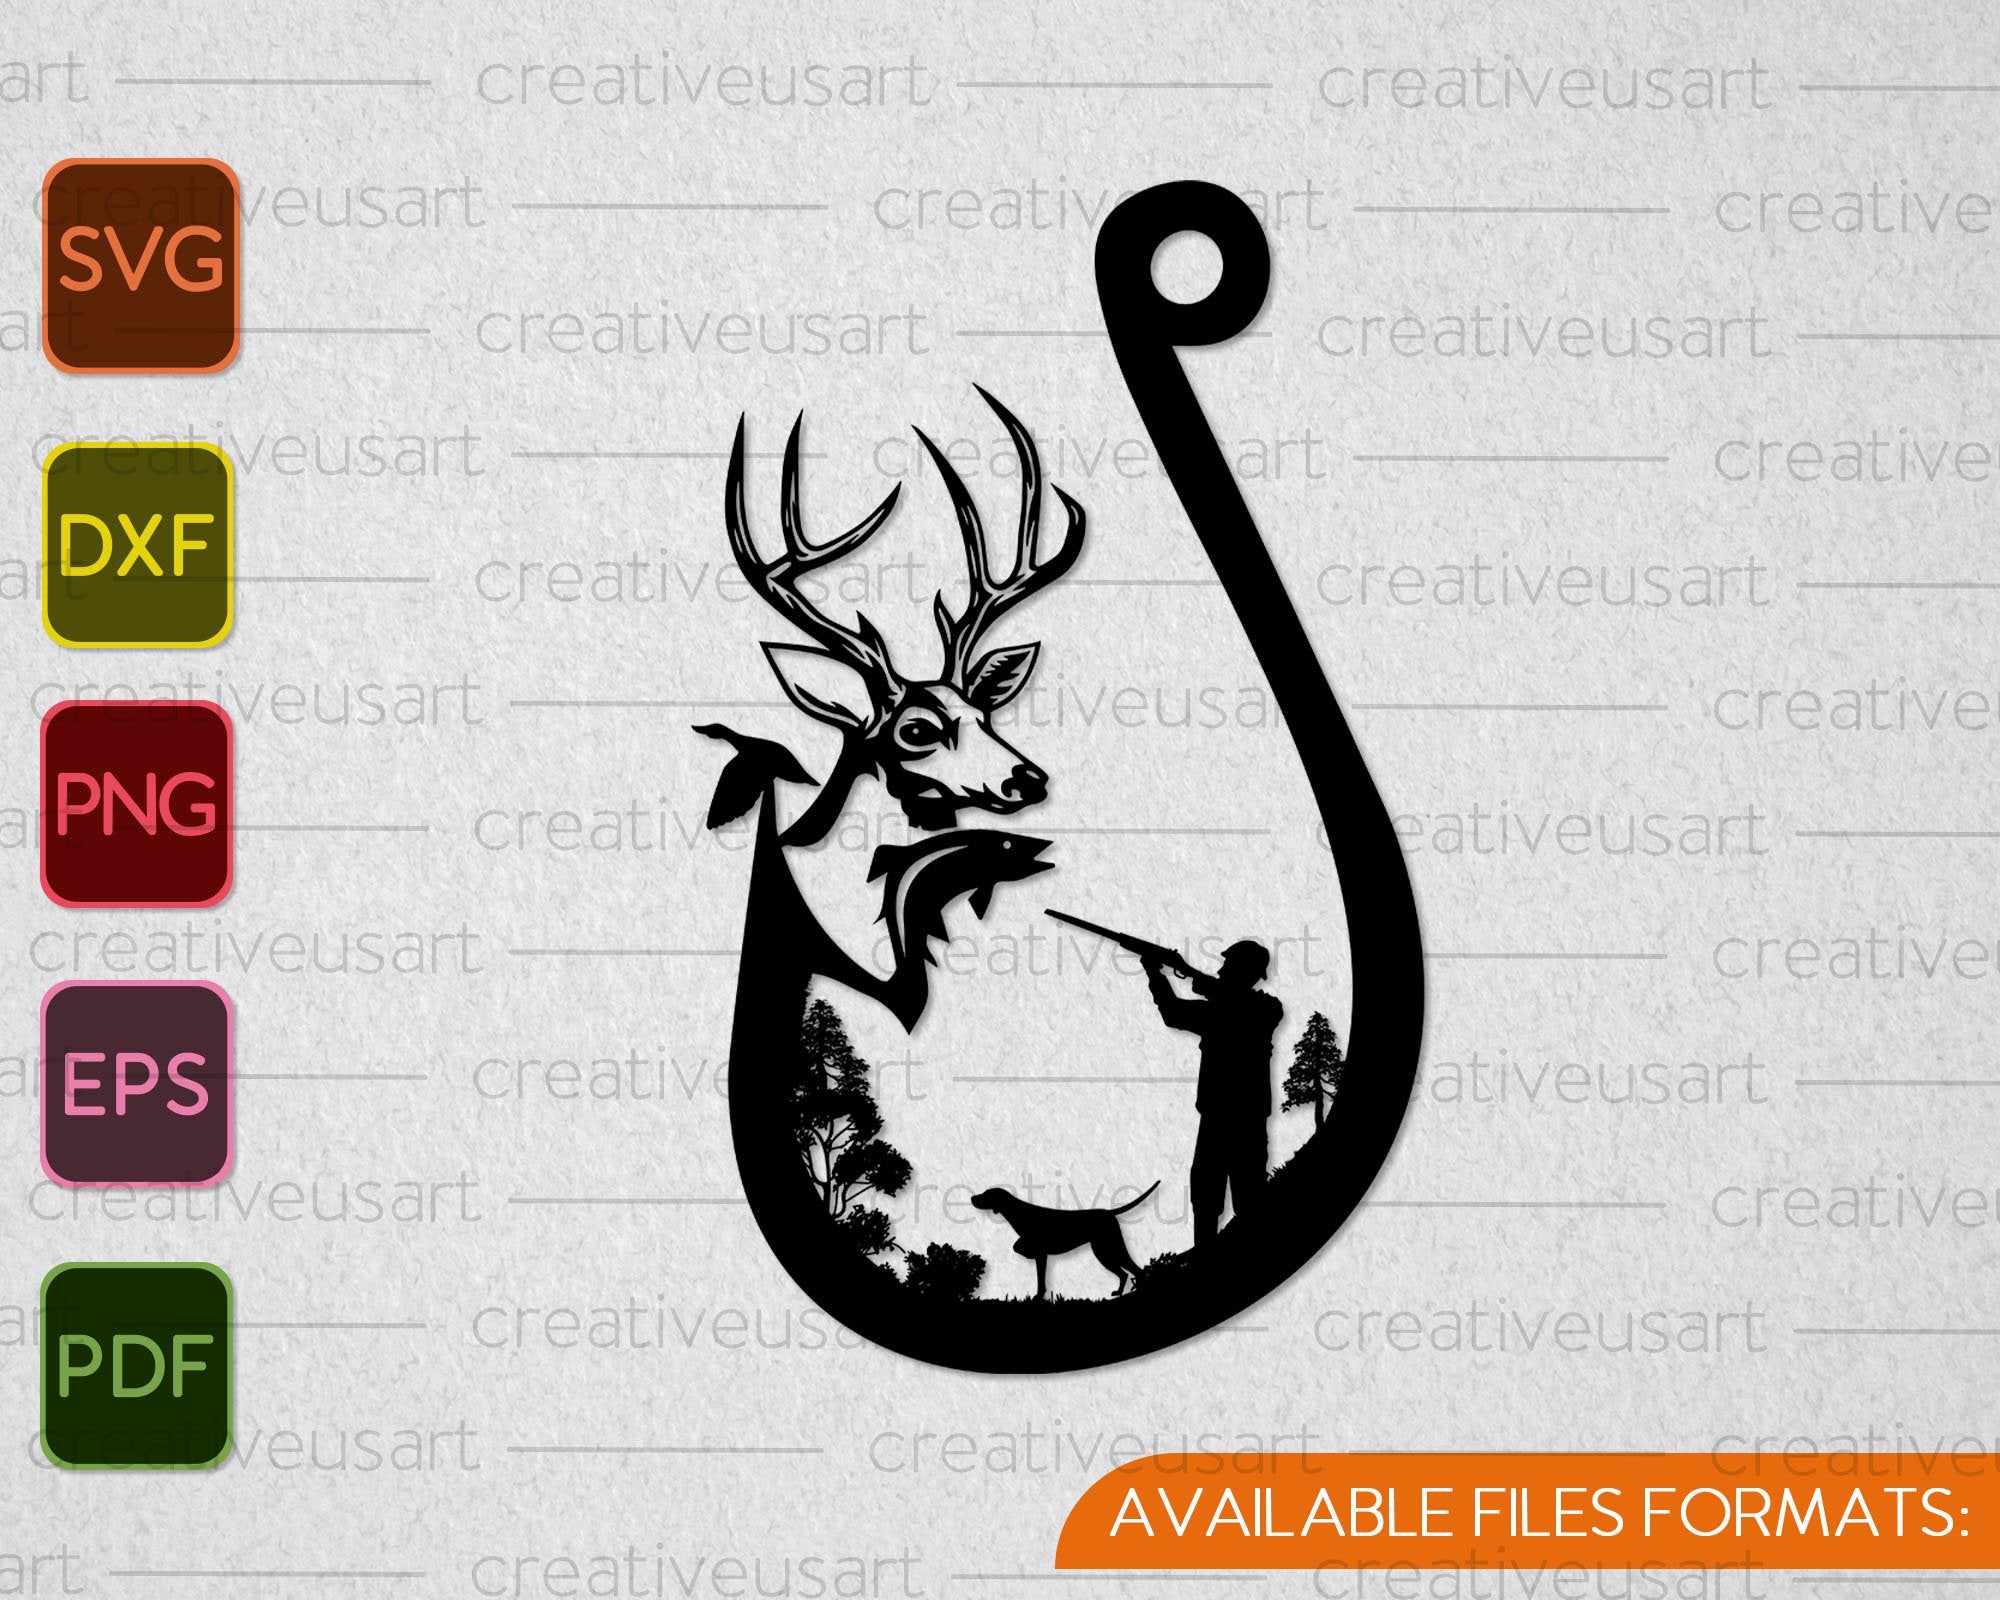 Deer And Hook Svg File Hunting And Fishing Svg File Hunting Fishing Duck Vector Clip Art Cricut Silhouette Cameo Vinyl Cut Visual Arts Craft Supplies Tools Kromasol Com